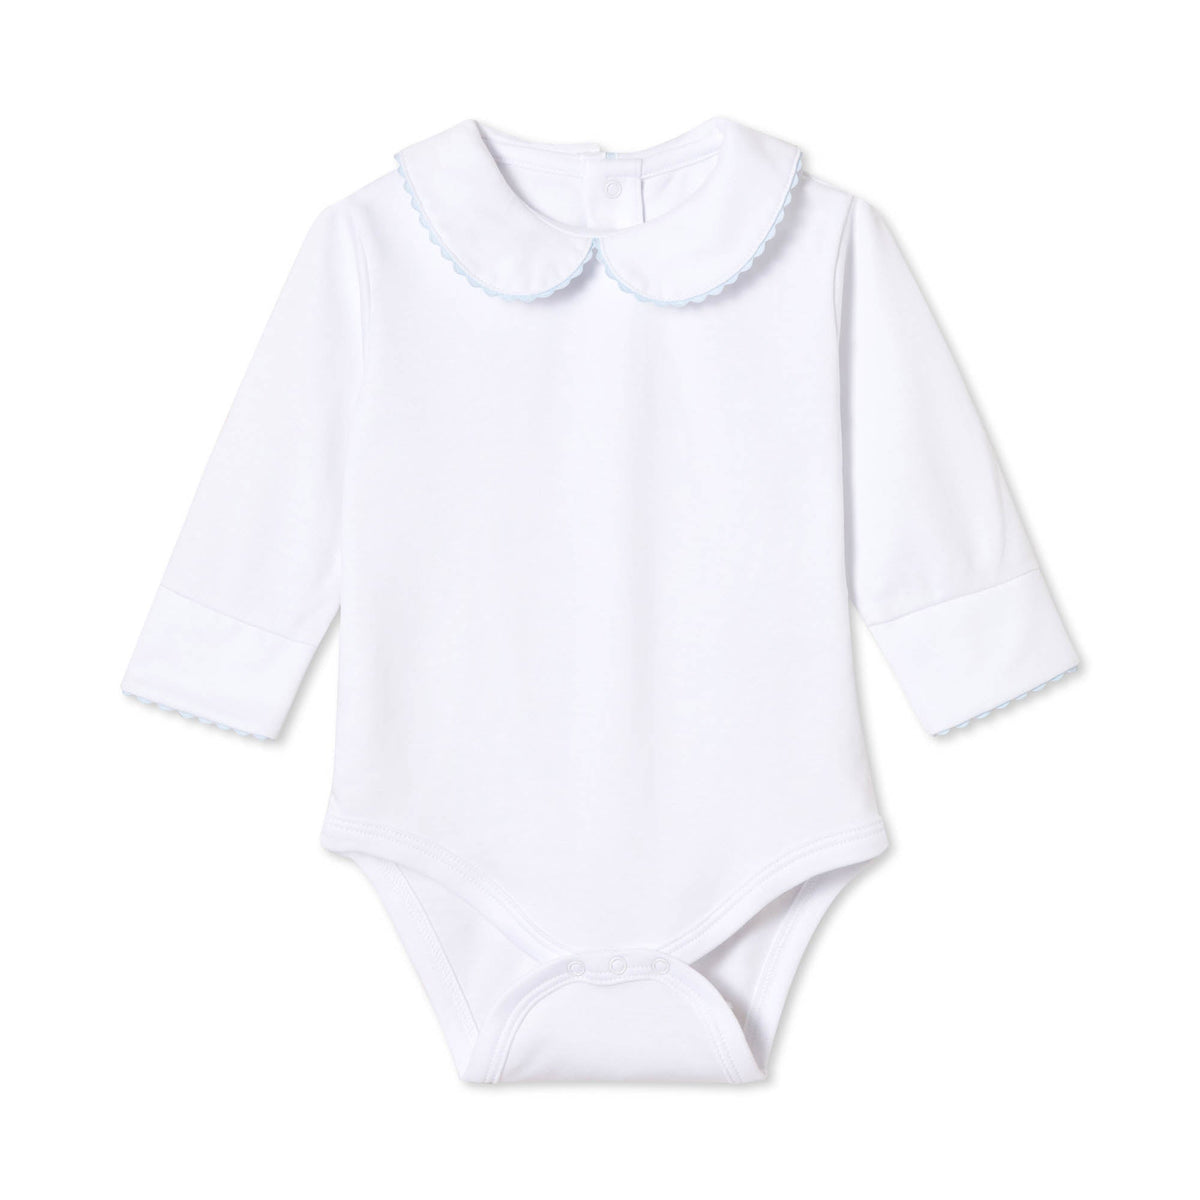 Classic and Preppy Izzy Long Sleeve Onesie, White with Skyride Ric Rac - FINAL SALE-Baby Rompers-White with Skyride-0-3M-CPC - Classic Prep Childrenswear